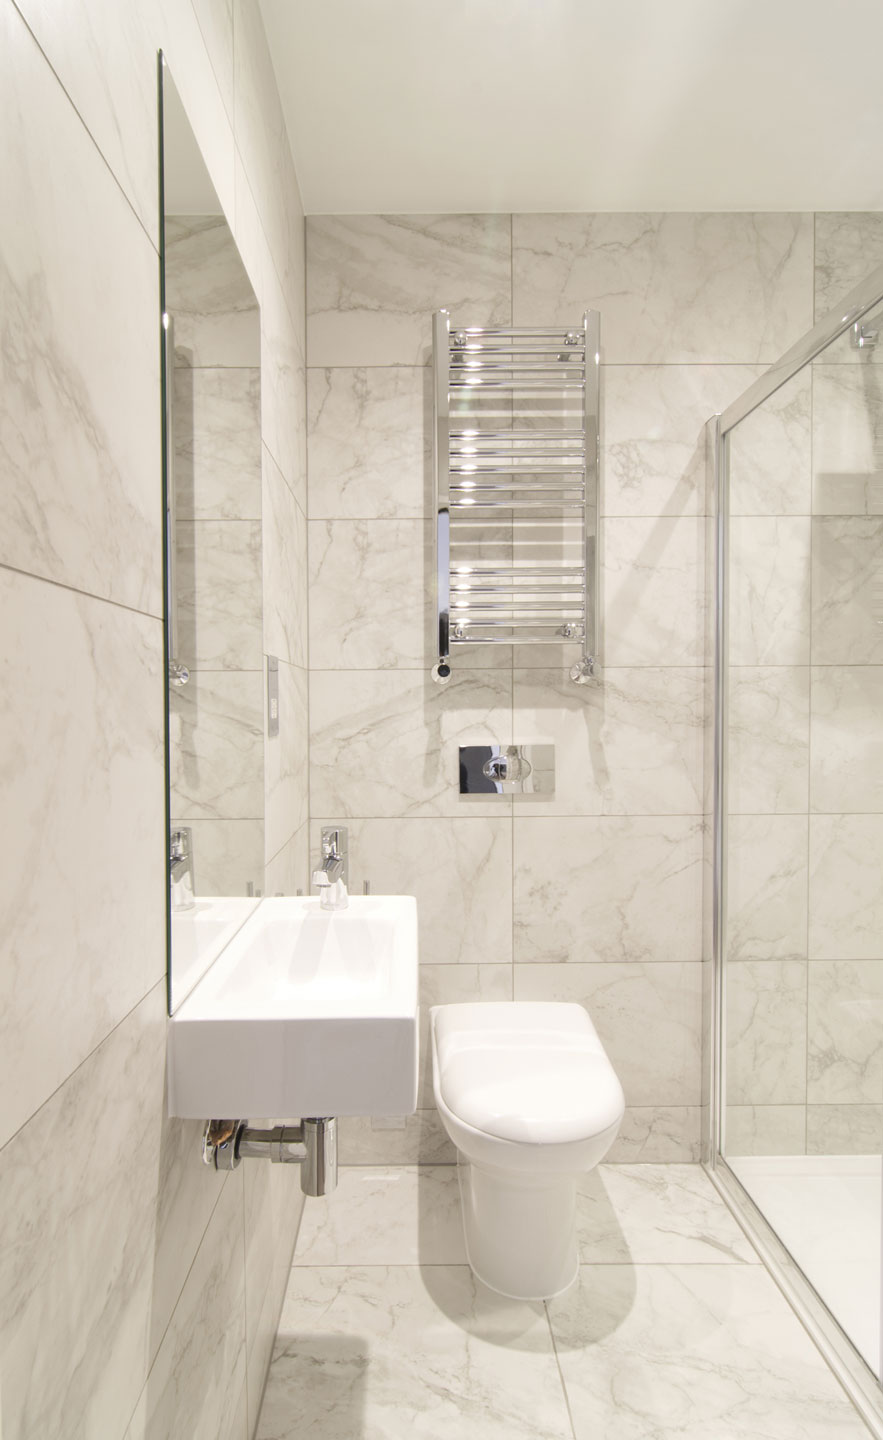 Small contemporary bathroom in white with glass shower area